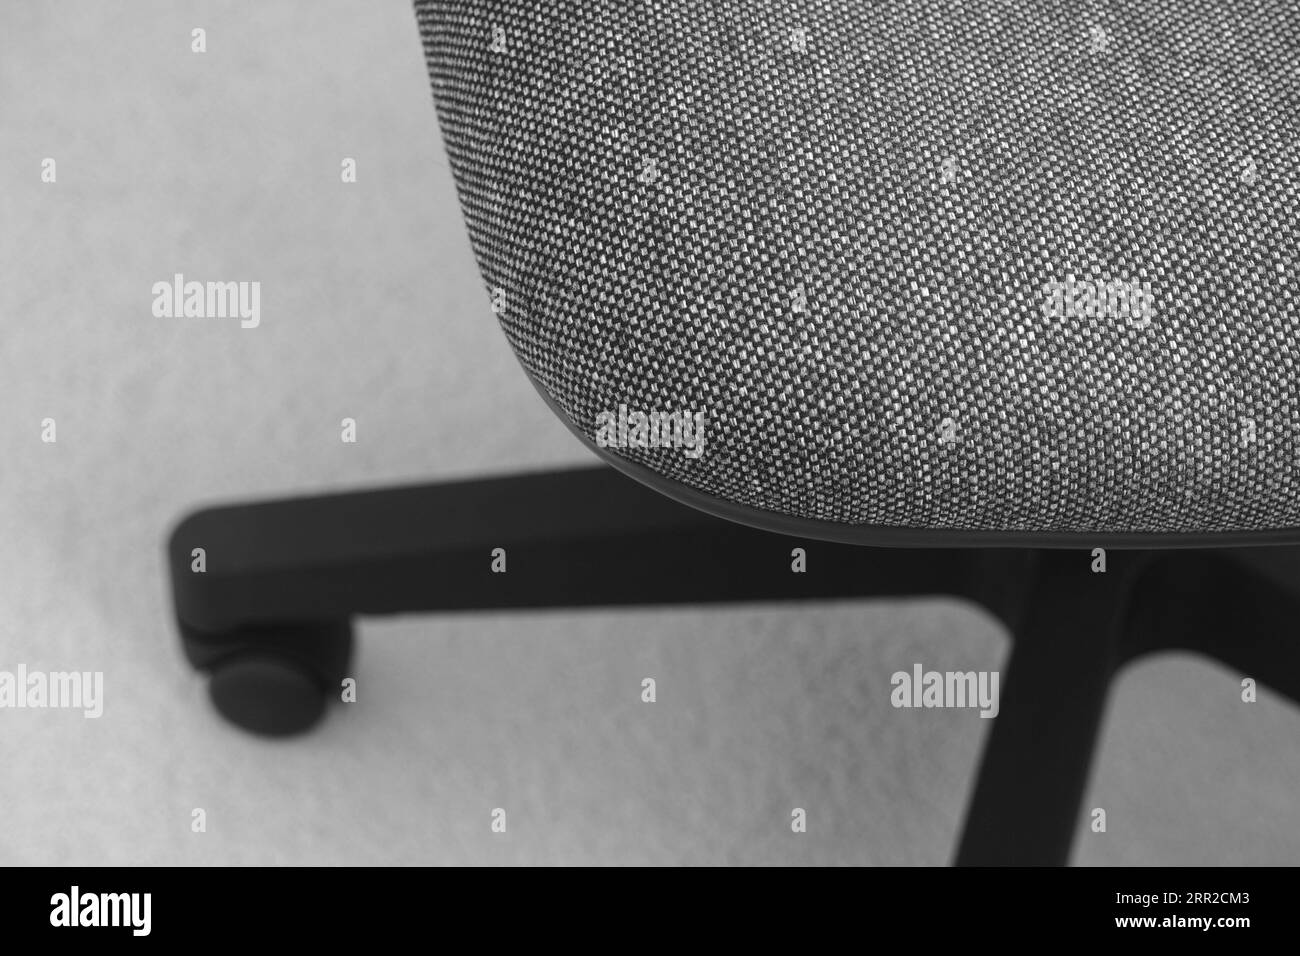 An office chair with wheels standing on a carpet. Black and white. Close up. Stock Photo